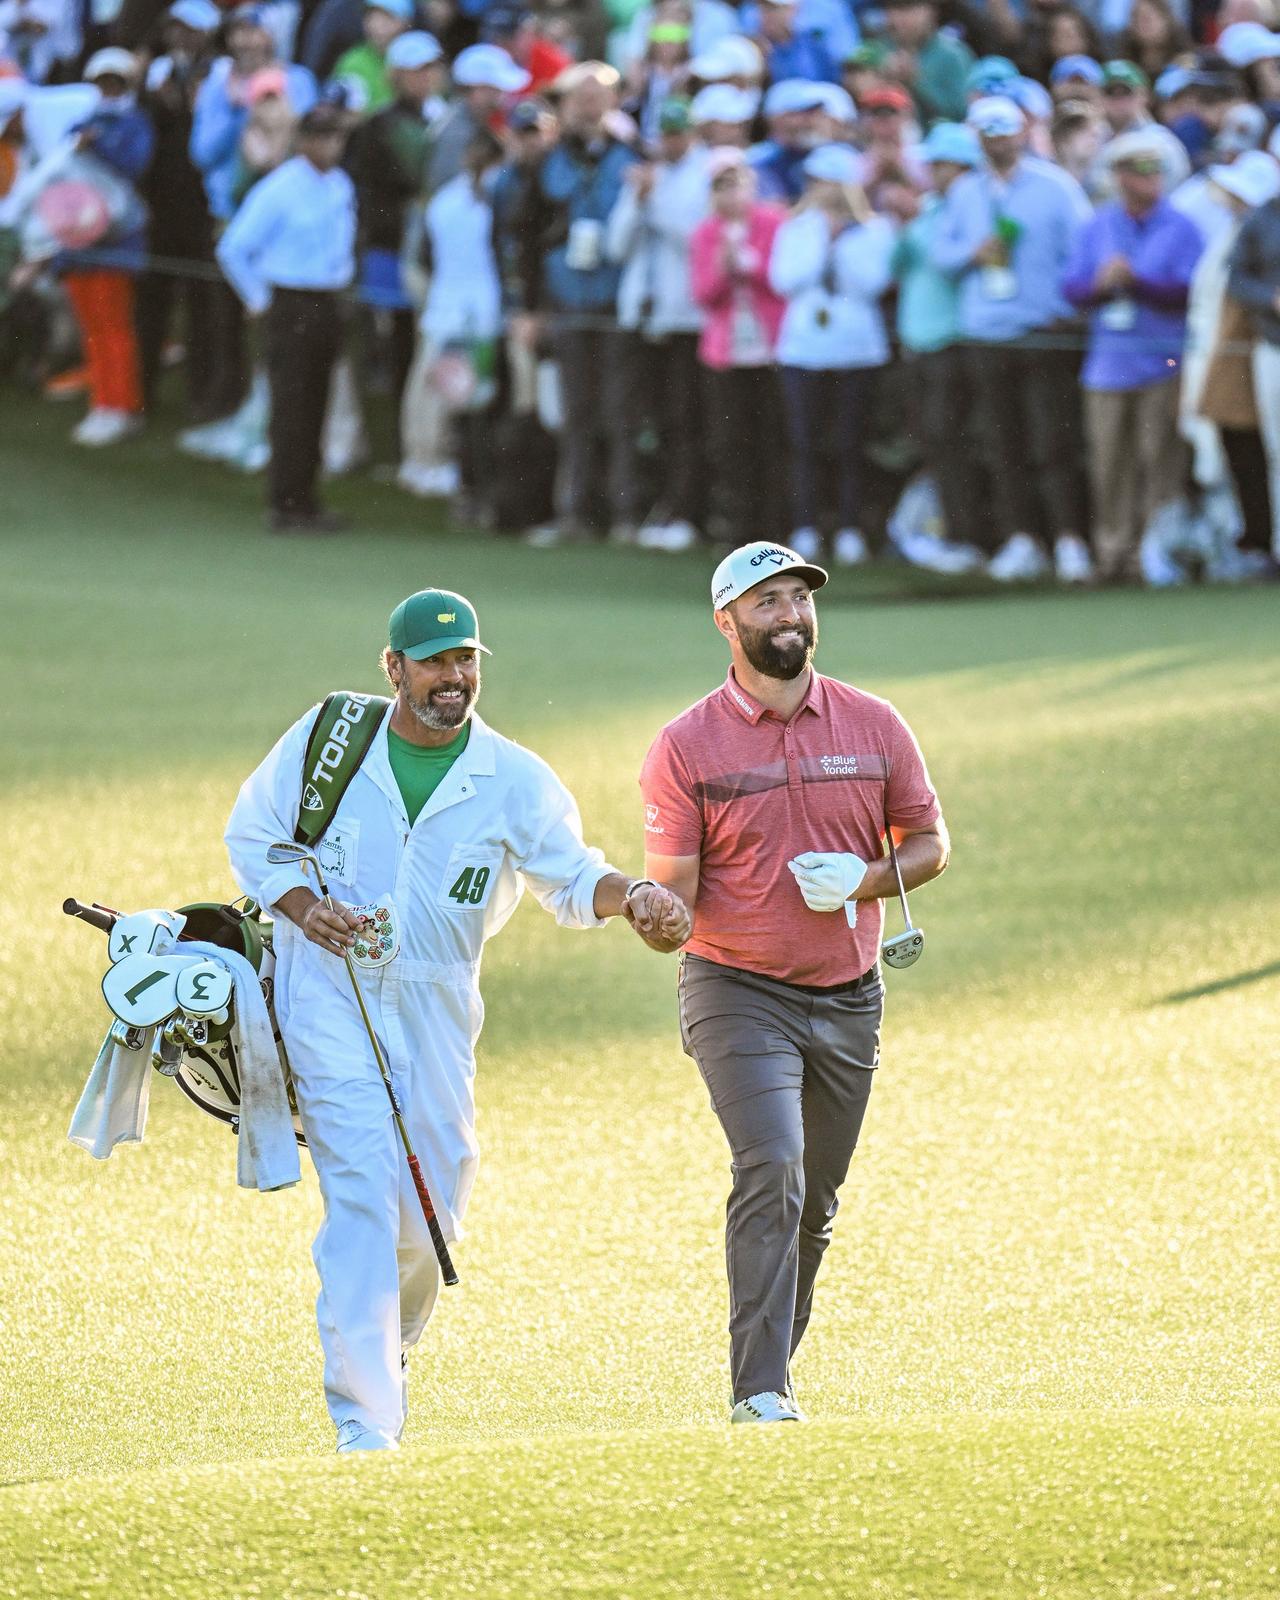 Two guys on the golf course at the Masters